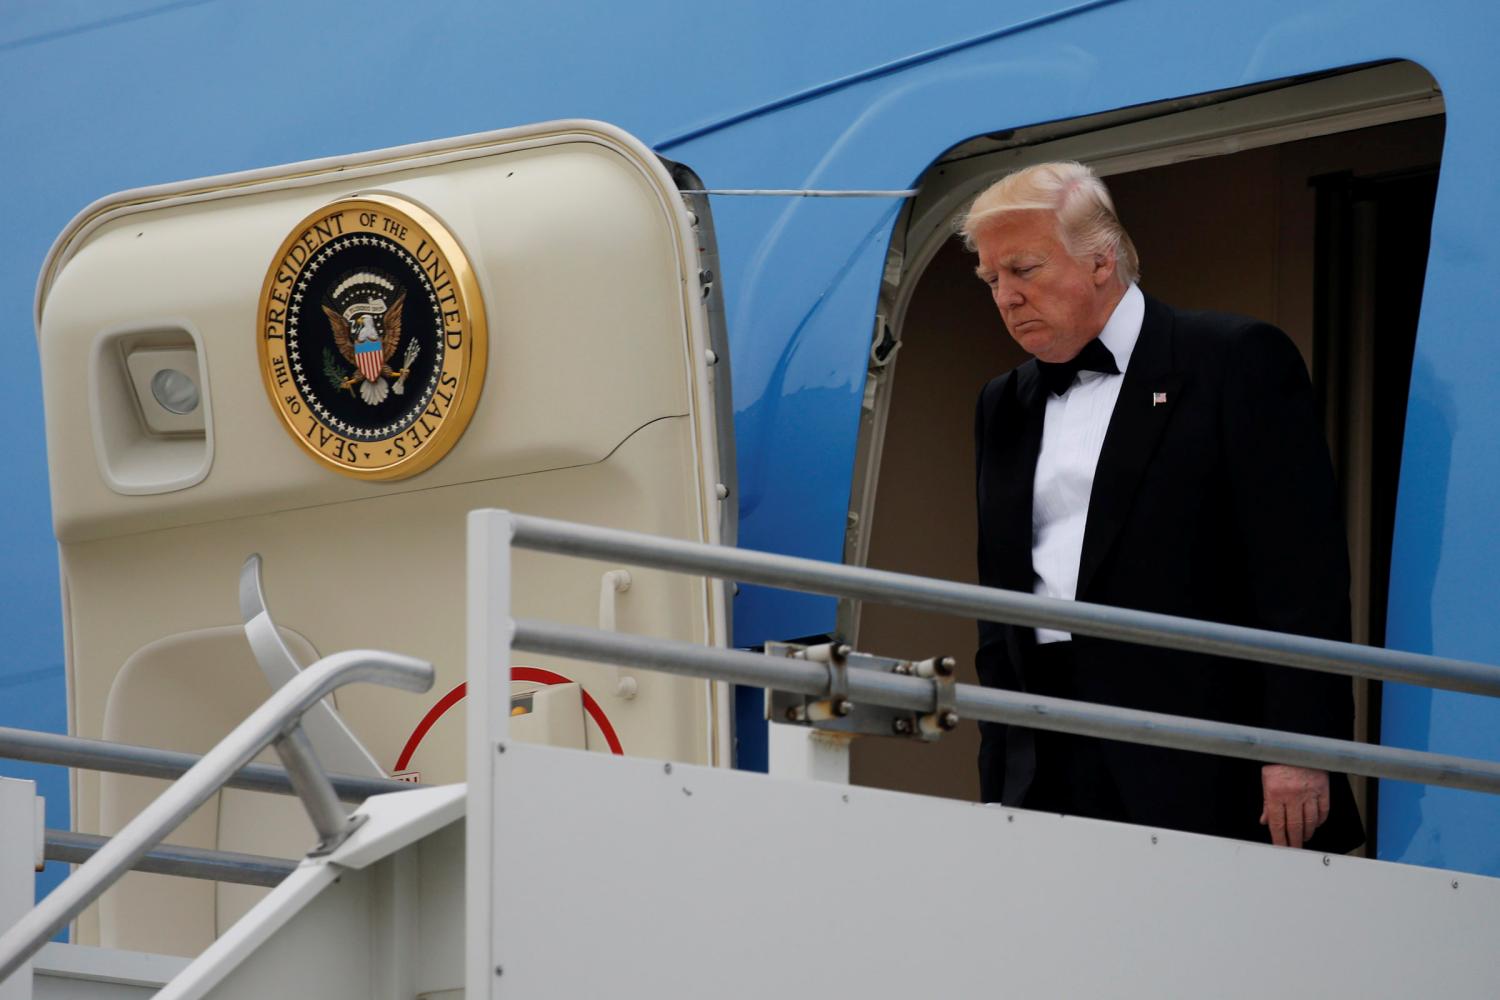 U.S. President Donald Trump arrives aboard Air Force One at JFK International Airport in New York, U.S. May 4, 2017. REUTERS/Jonathan Ernst - RTS1589H